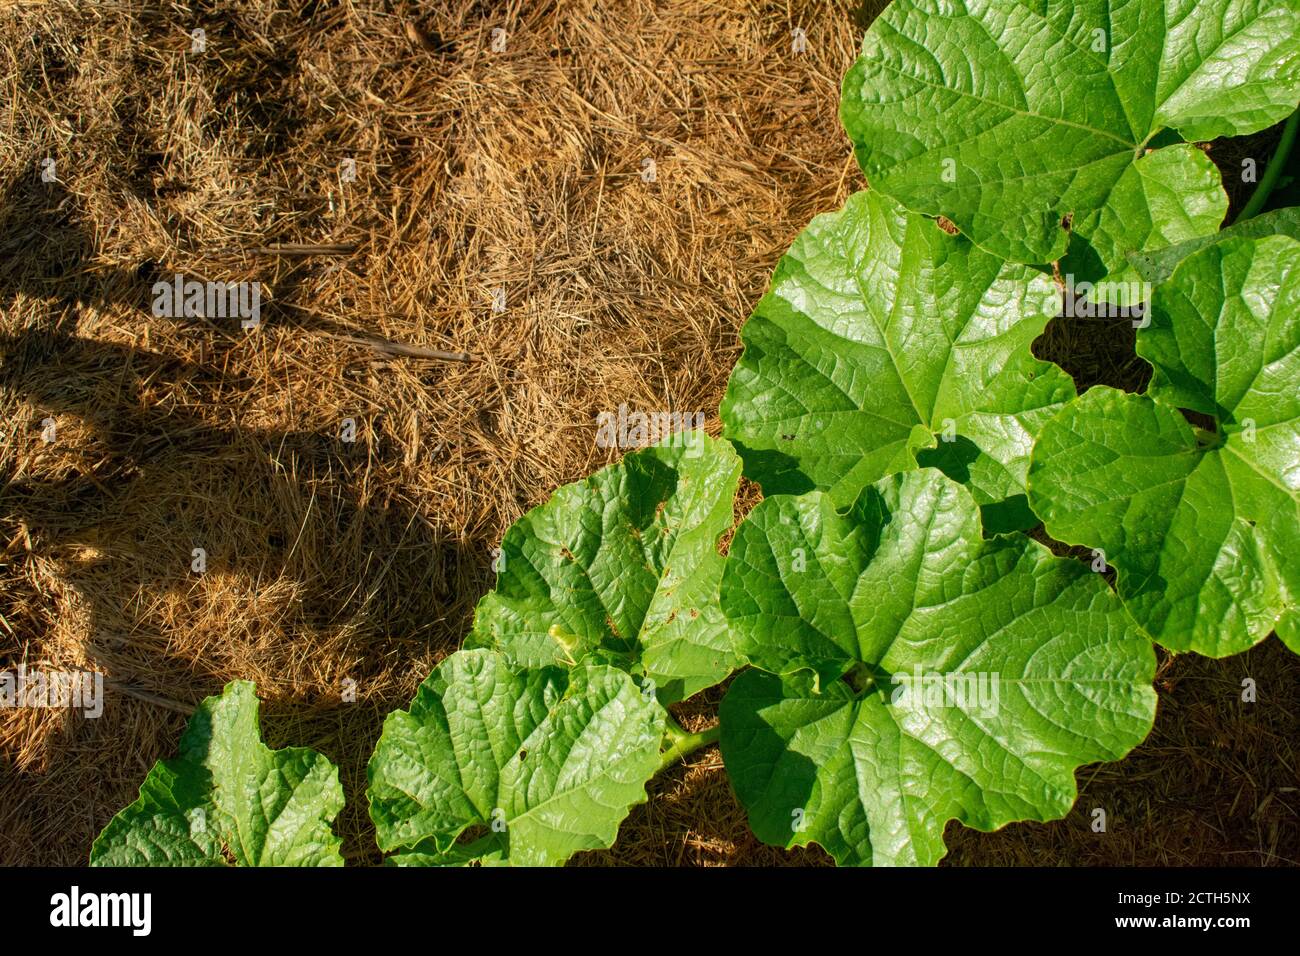 Vining vegetable plant in a garden with grass mulch. Stock Photo